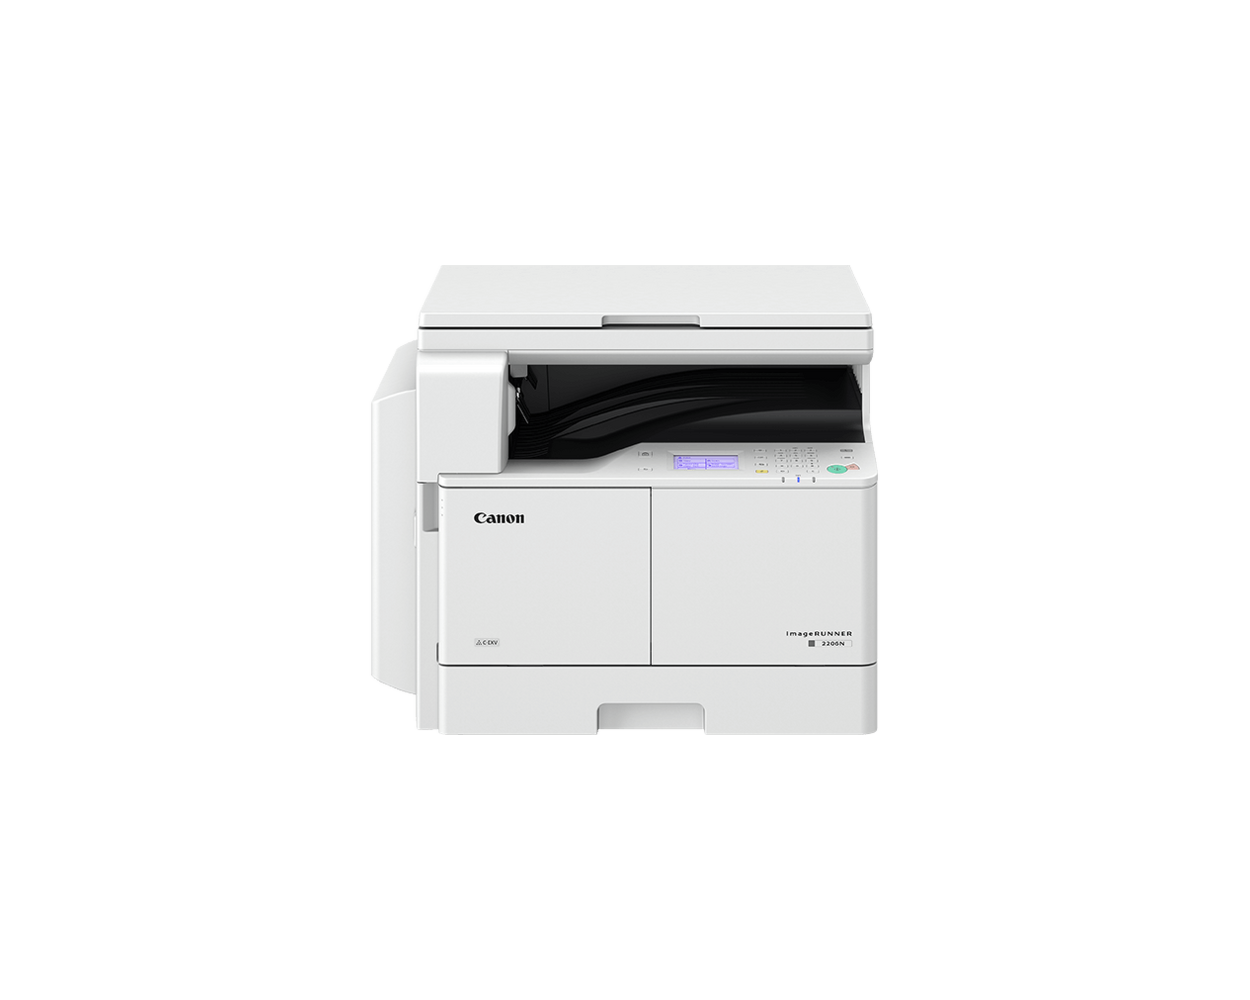 <b>Canon Mf Scan Utility Free Download</b>0″ loading=”lazy” style=”width:100%;text-align:center;” onerror=”this.onerror=null;this.src=’https://tse1.mm.bing.net/th?q=canon+mf+scan+utility+free+download0;'” /><small style=